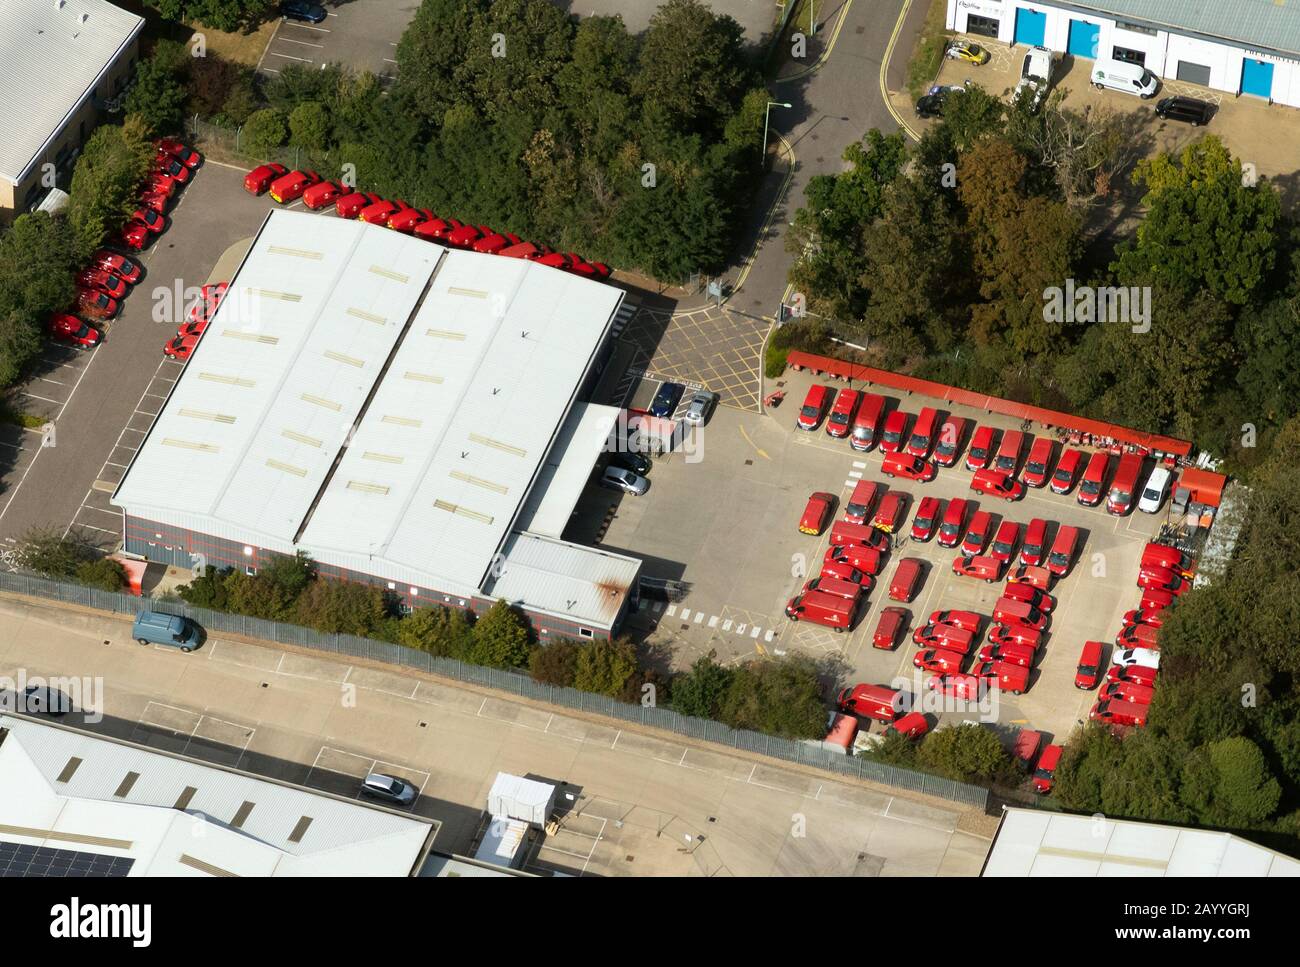 Royal Mail sorting office in Bury St Edmunds, UK, aerial view Stock Photo